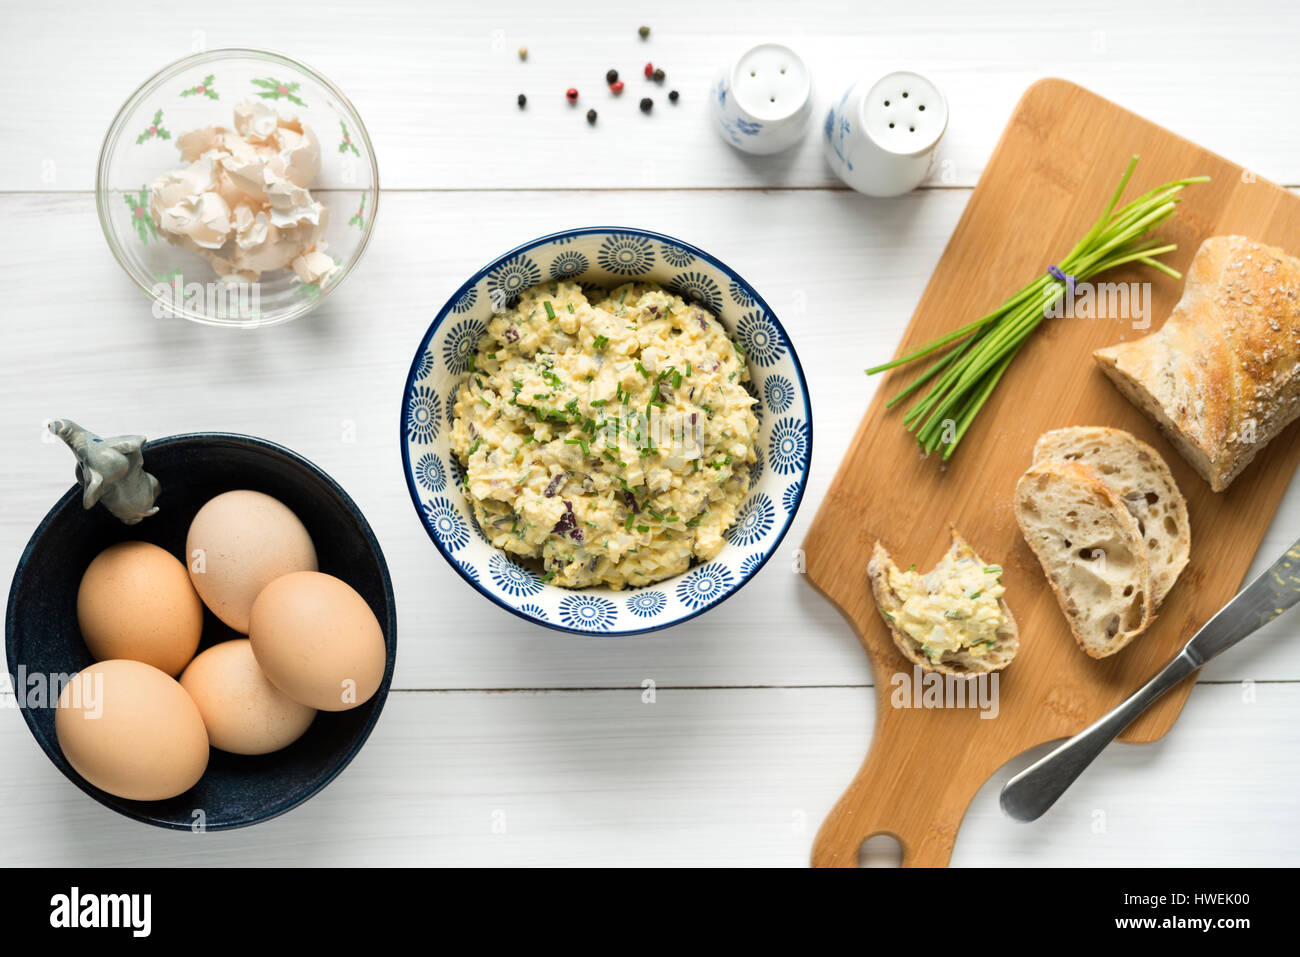 Homemade egg salad spread with mayonnaise, mustard, red onion sprinkled with chives, top view background on white table. Stock Photo